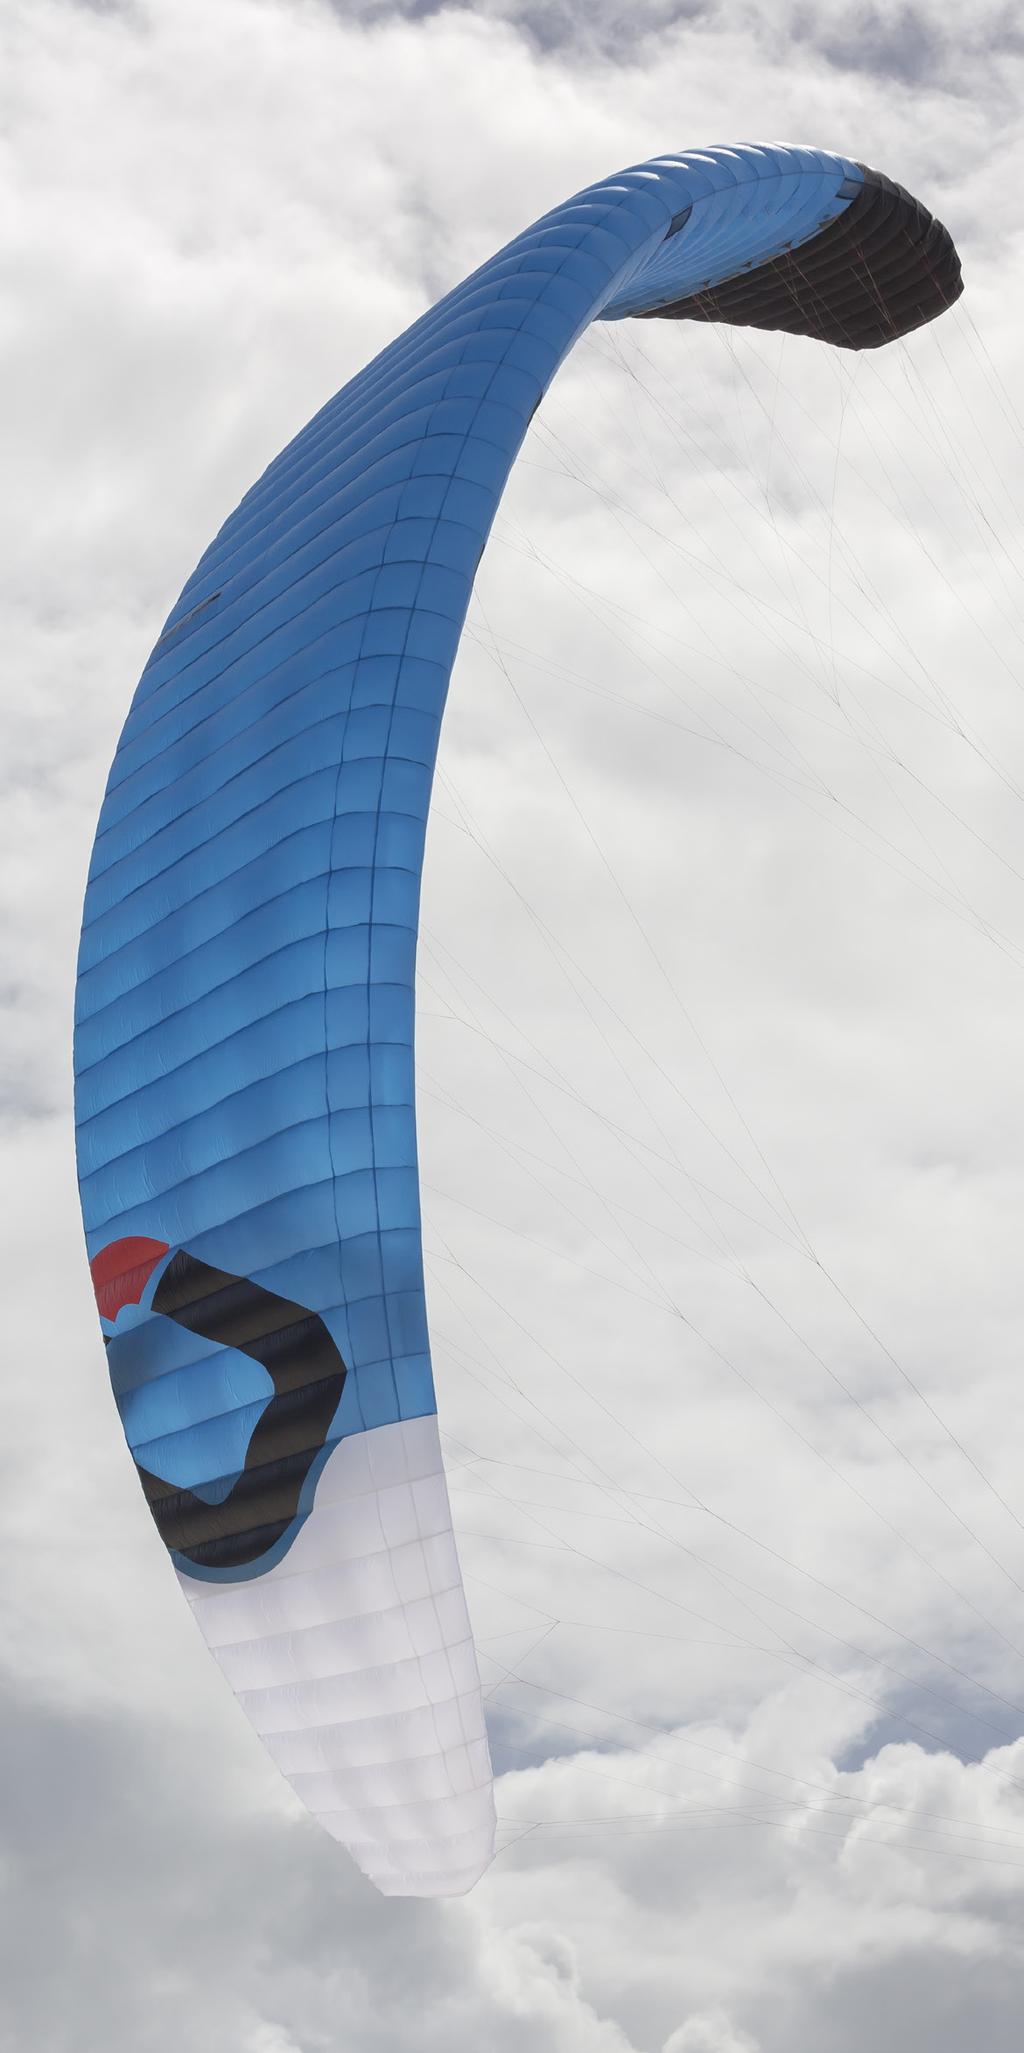 A drainage system on the wing tip allows any water that may have entered the kite to drain out. Do not use the kite in waves. Always use a Brake Handle when flying a foil kite.